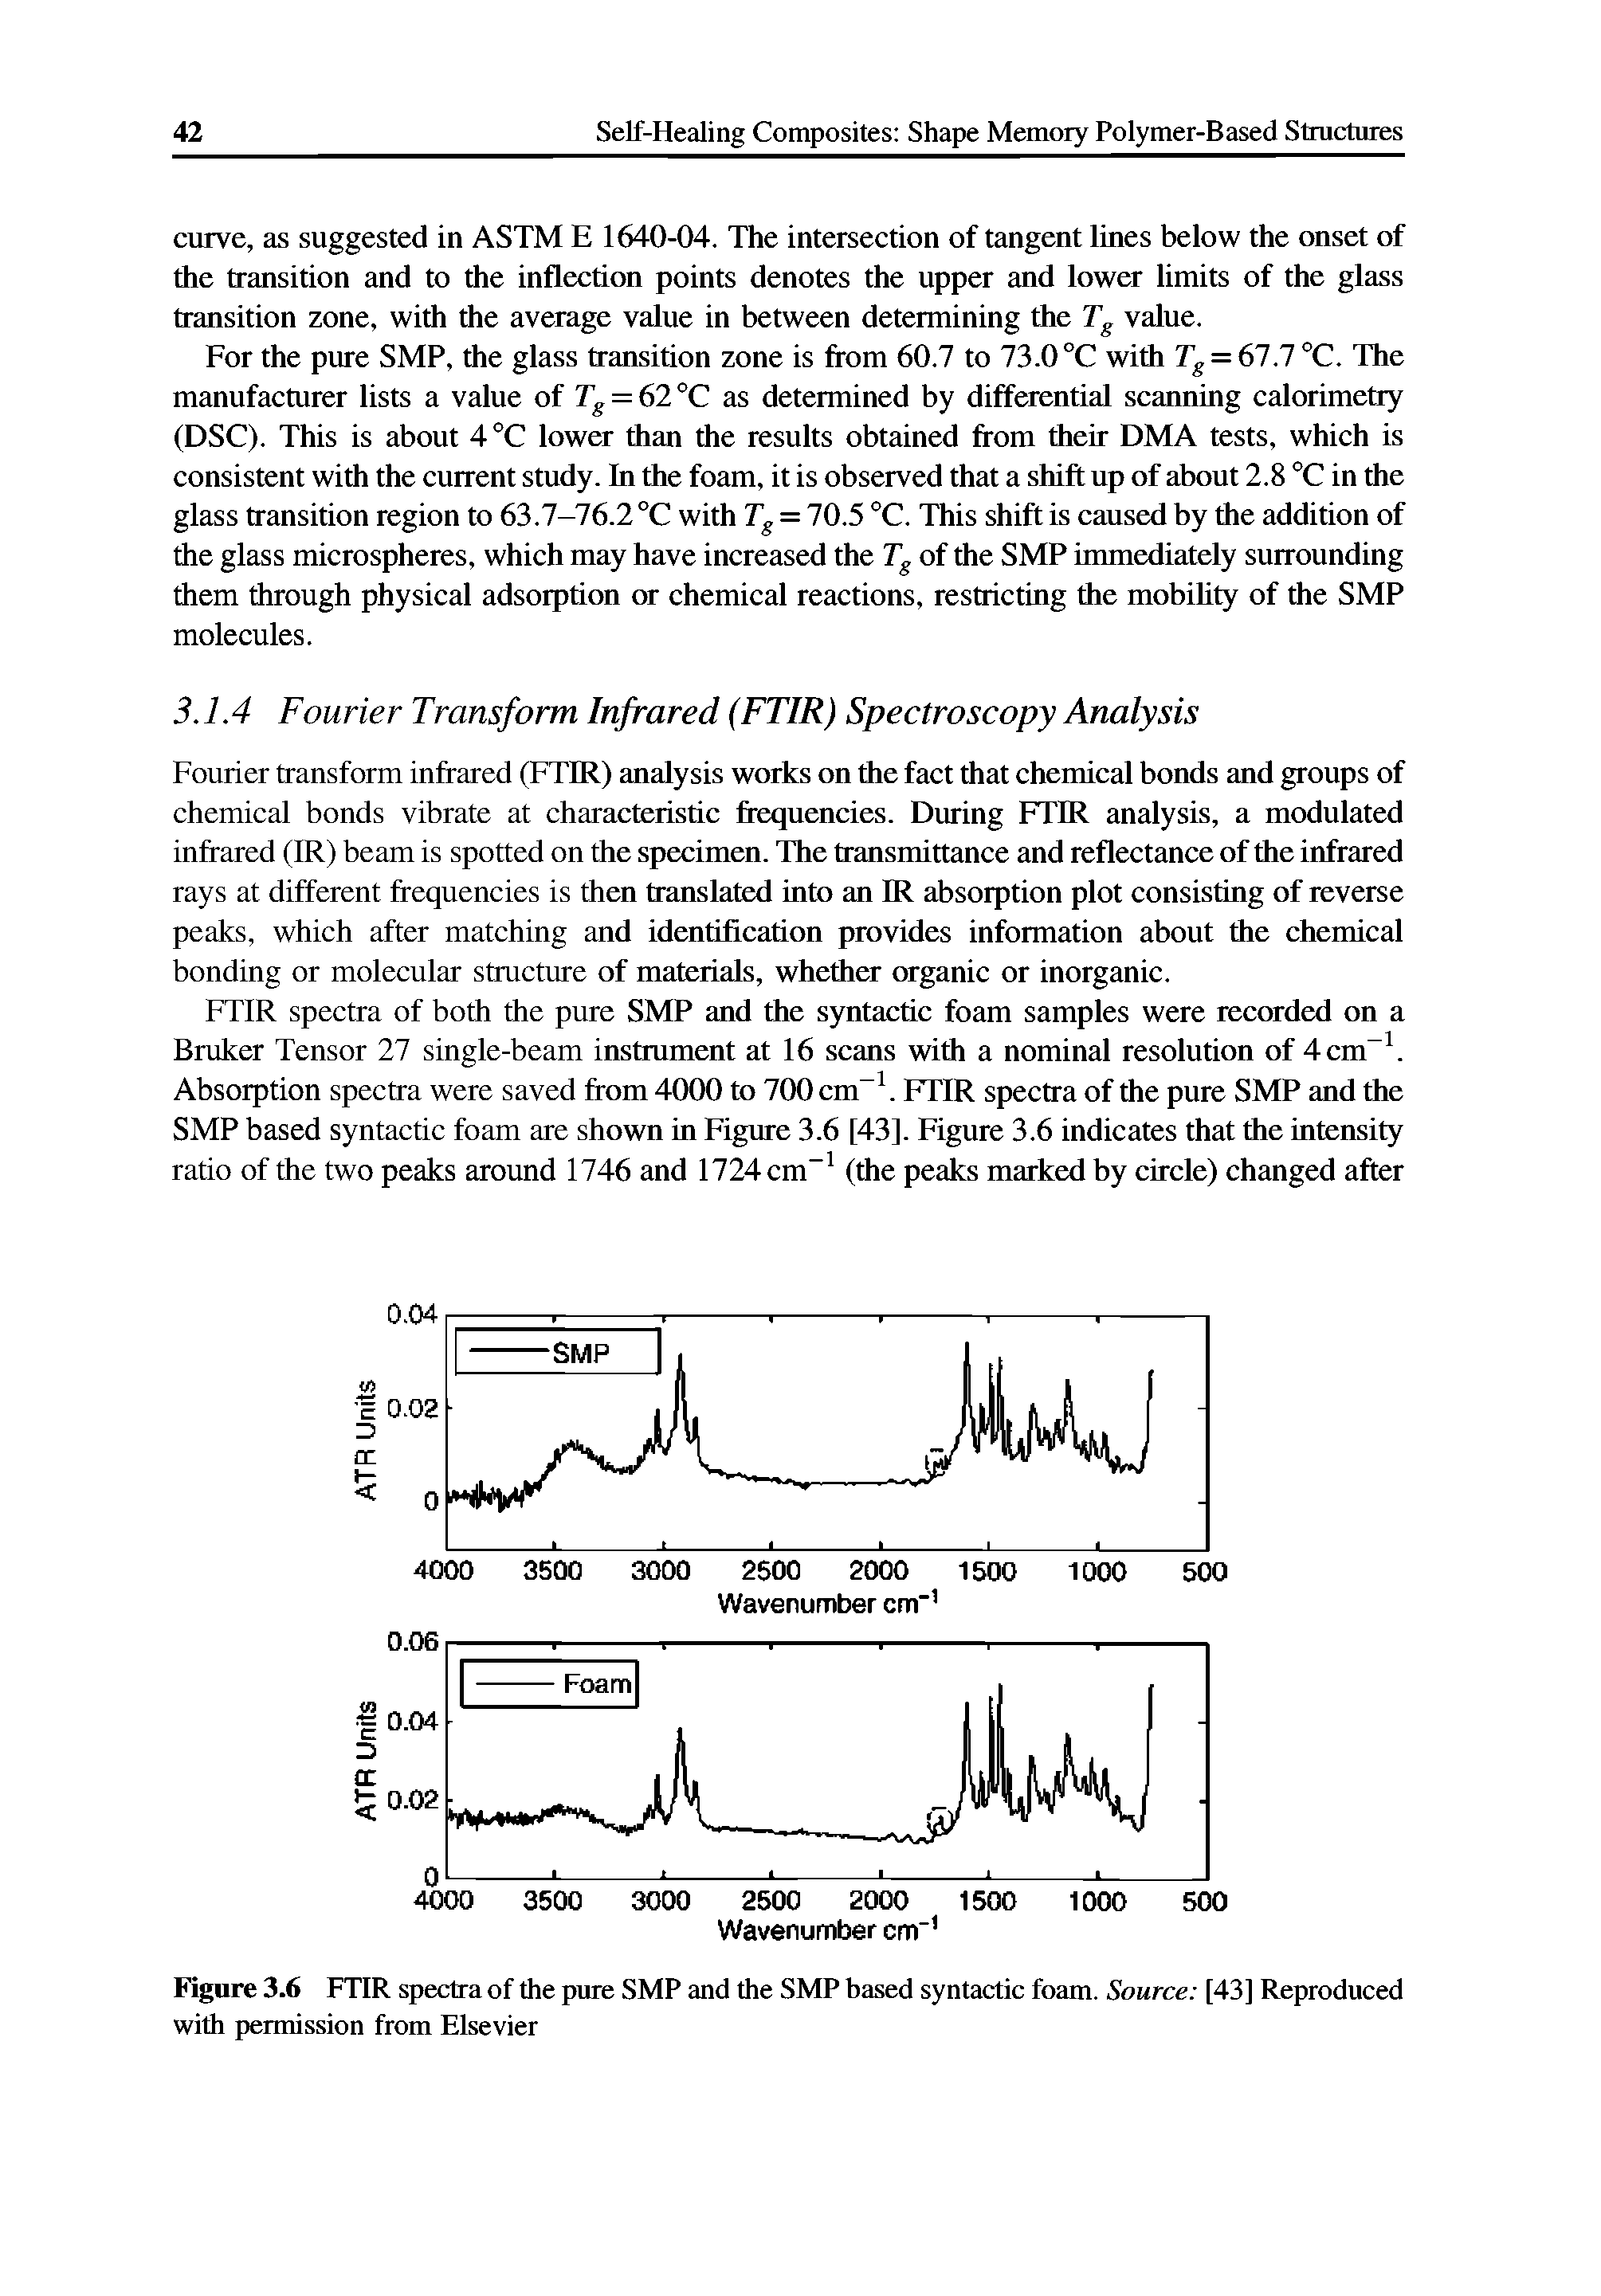 Figure 3.6 FTIR spectra of the pure SMP and the SMP based syntactic foam. Source [43] Reproduced with permission from Elsevier...